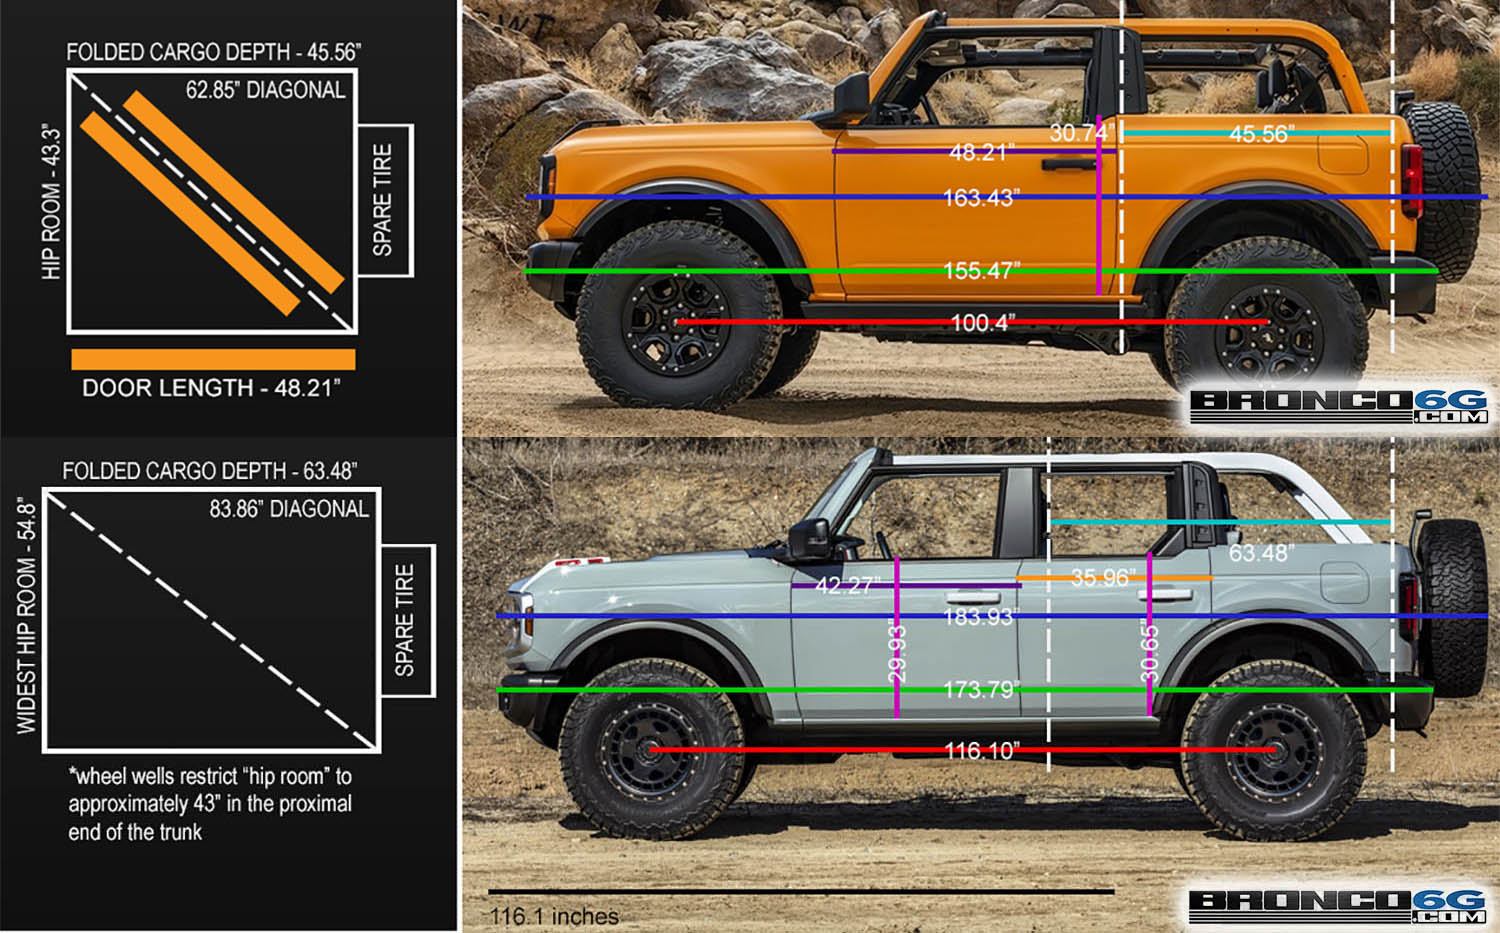 2021-Ford-Bronco-Cargo-Space-Rear-Seats-Folded-Down-Analysis.jpg